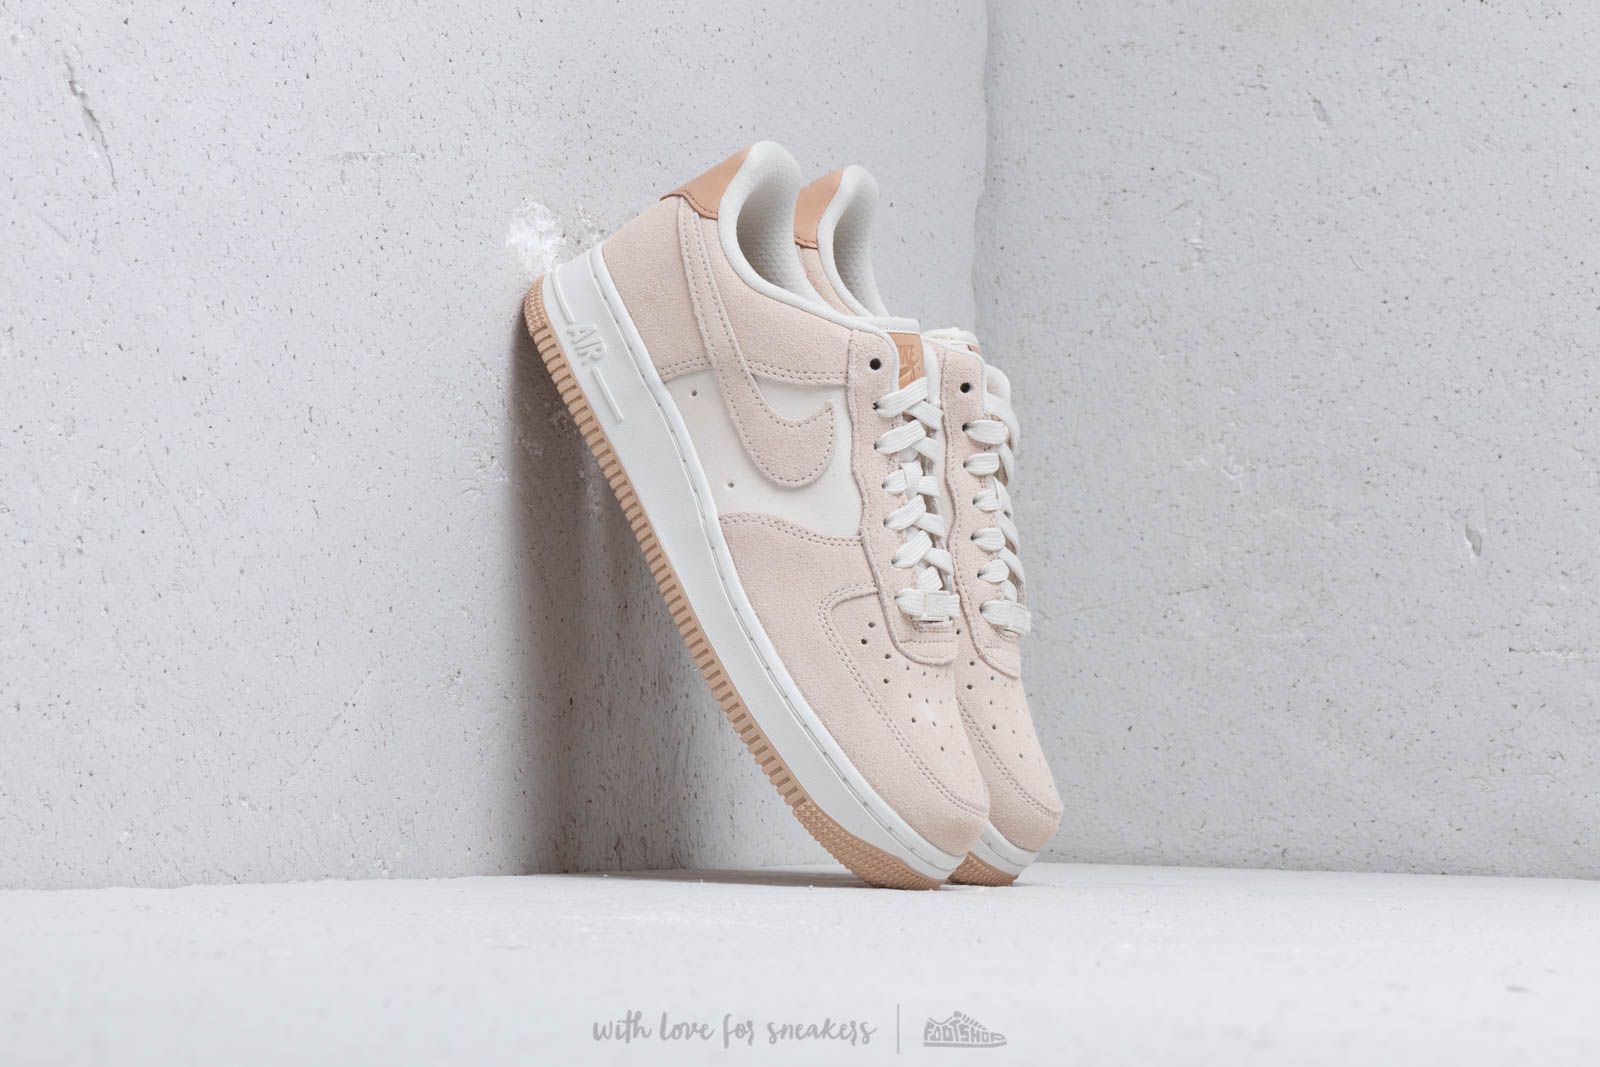 Chaussures et baskets femme Nike Wmns Air Force 1 '07 Premium Pale Ivory/ Pale Ivory-Summit White